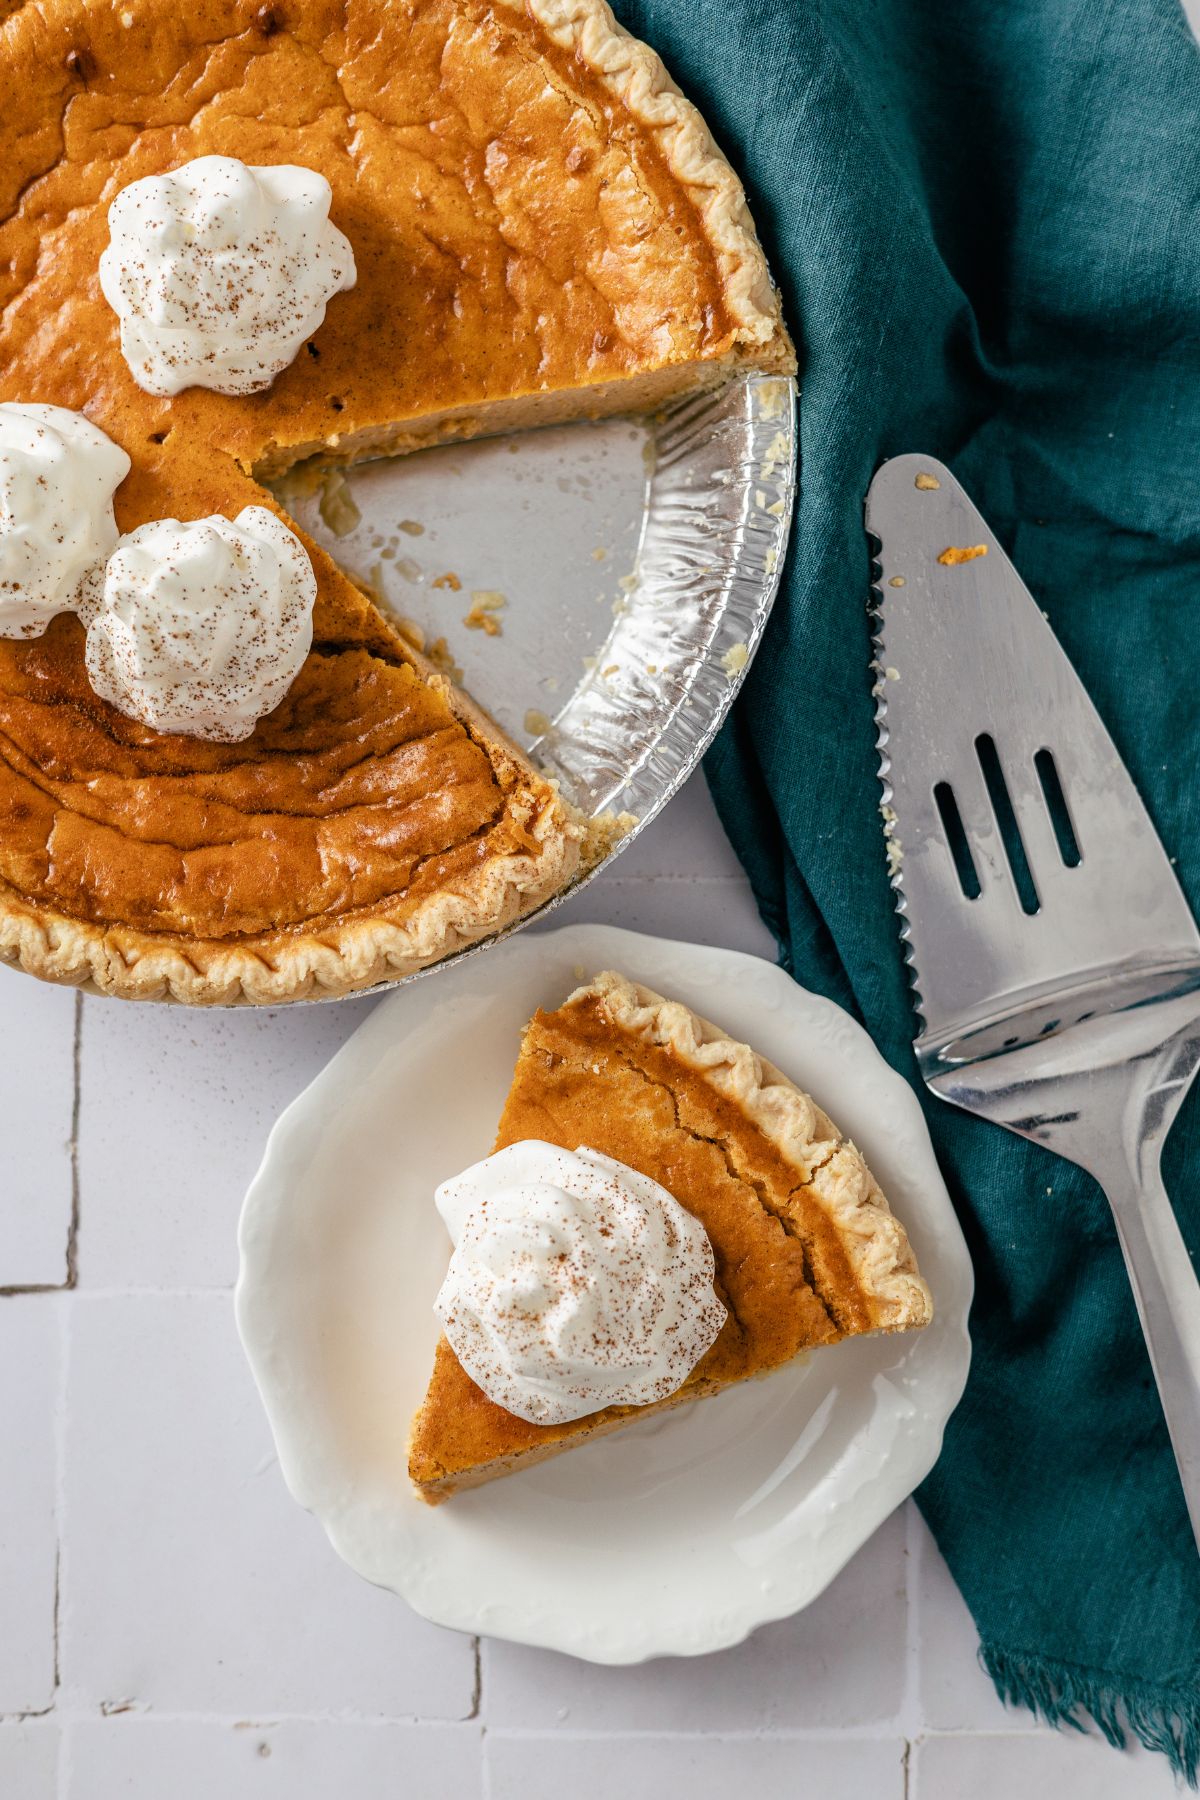 Sweet Potato Pie with Condensed Milk topped with whipped cream on a plate